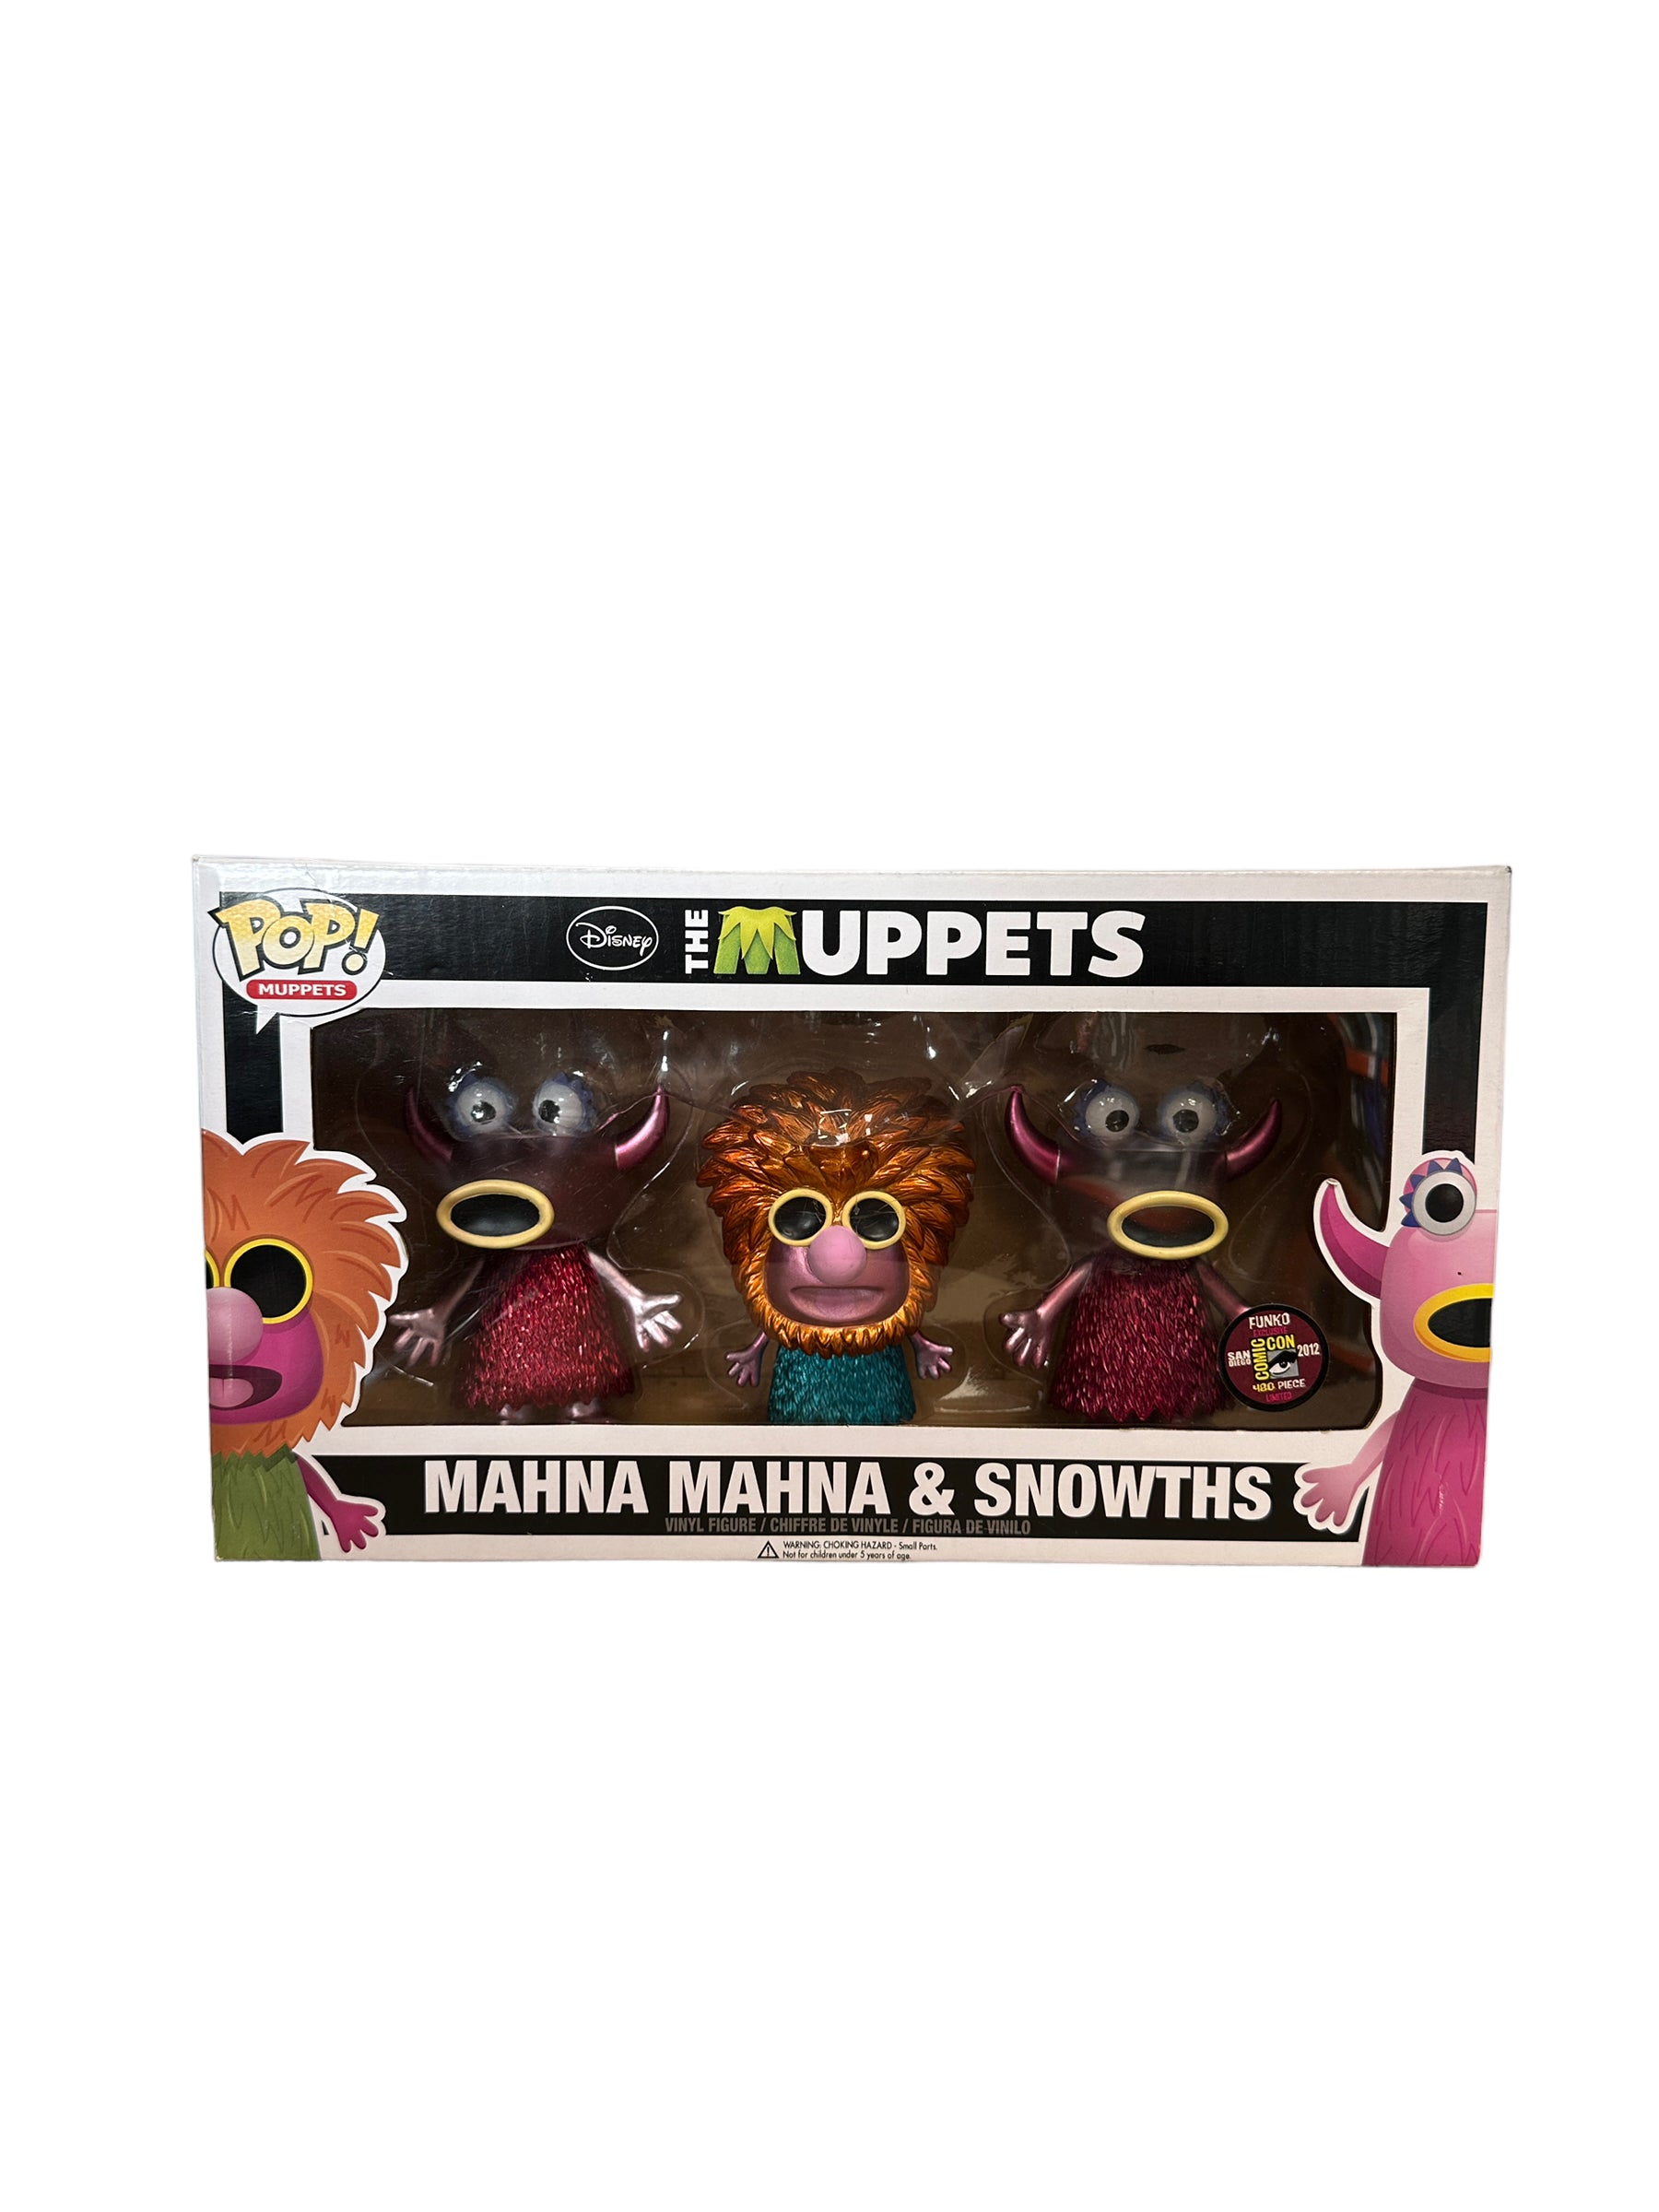 Mahna Mahna and Snowths (Metallic) 3 Pack Funko Pop! - The Muppets - SDCC 2012 Exclusive LE480 Pcs - Condition 7/10